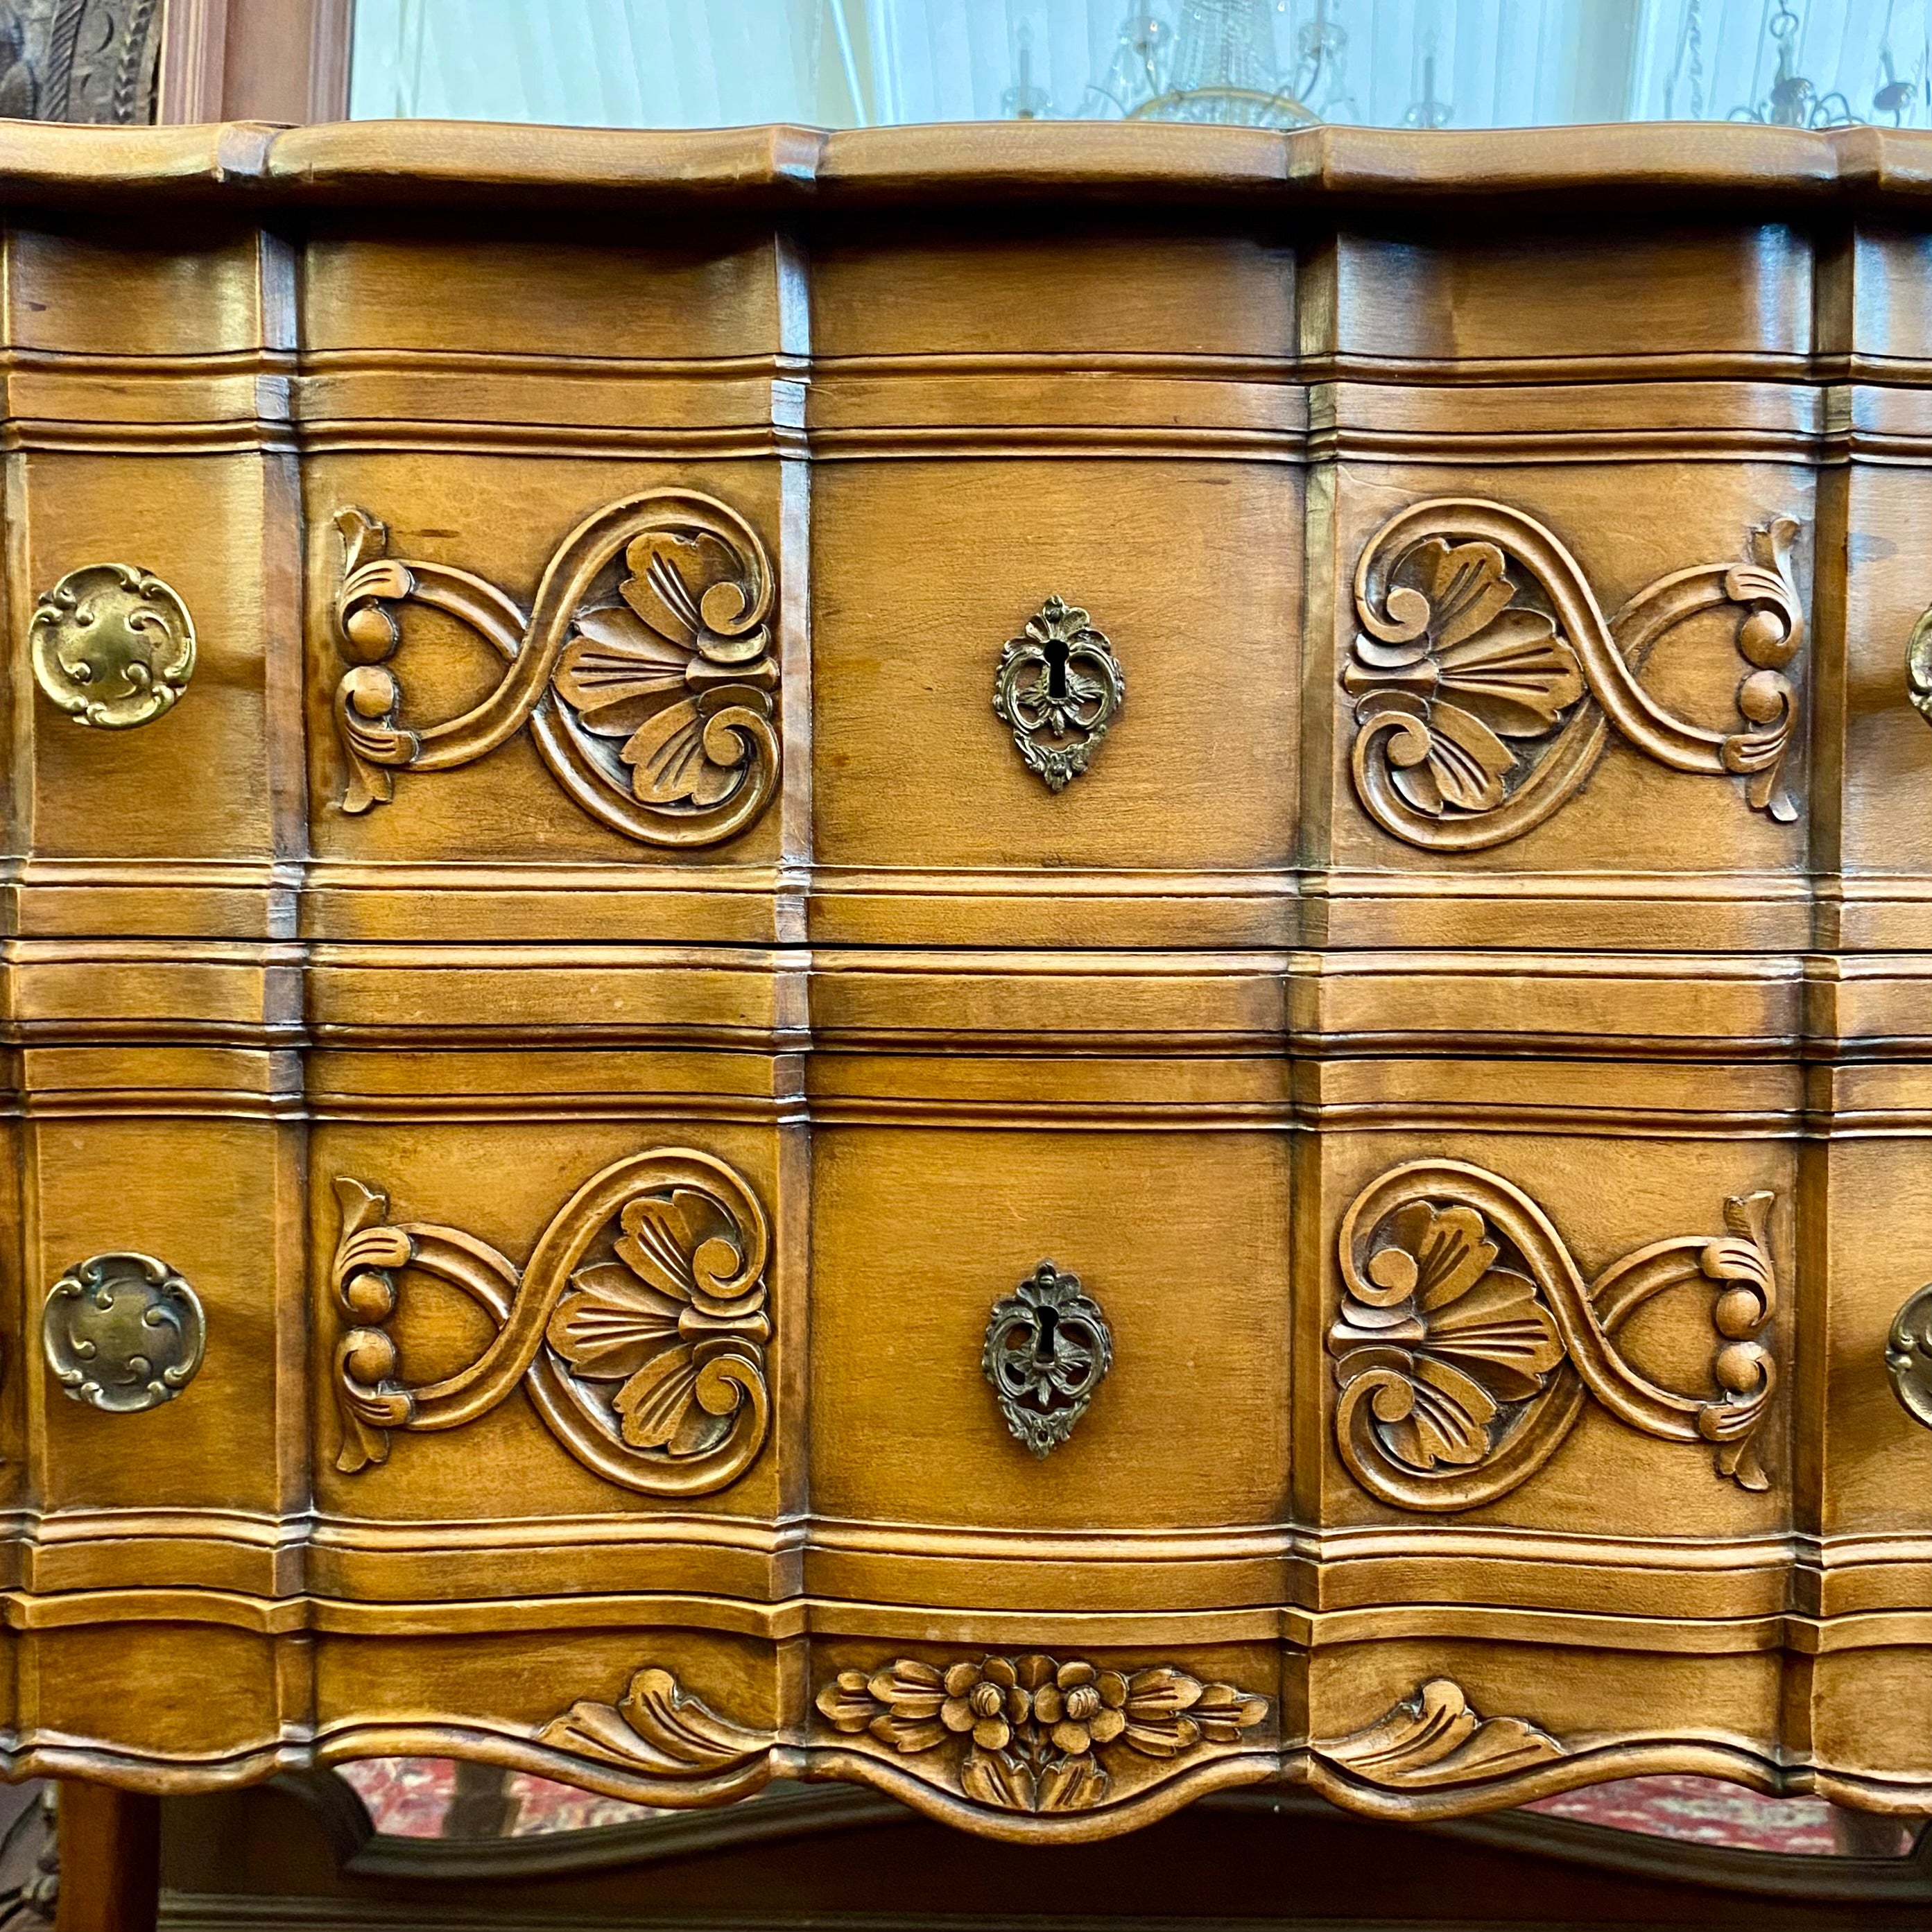 Antique French Oak Chest of Drawers